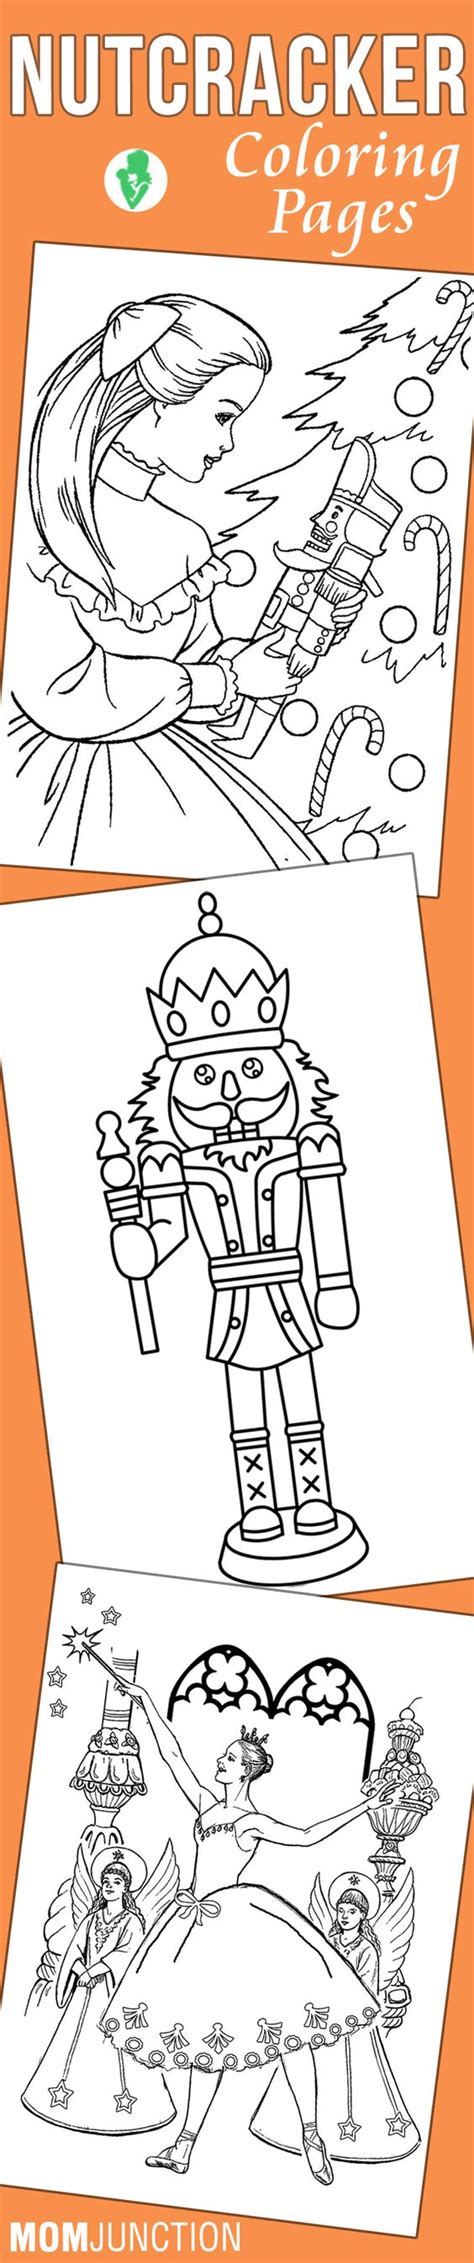 Free printable ballerina coloring pages. Top 20 Free Printable Nutcracker Coloring Pages Online ...